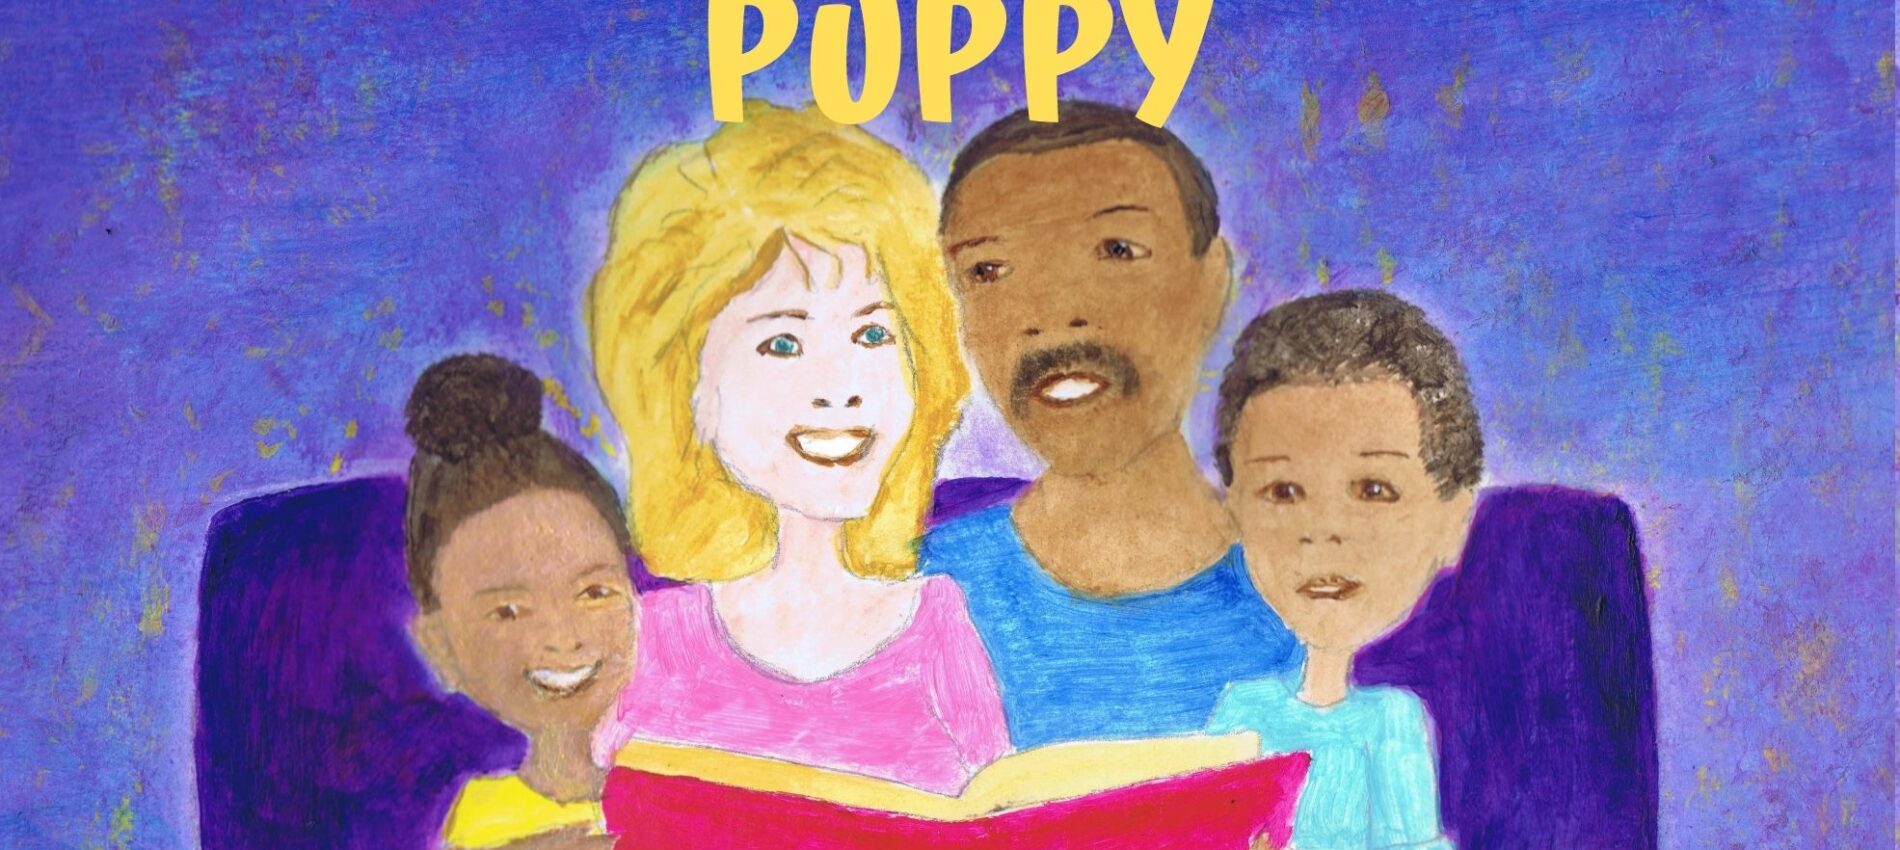 When-Can-We-Get-A-Puppy-Published-Cover-Oct-2